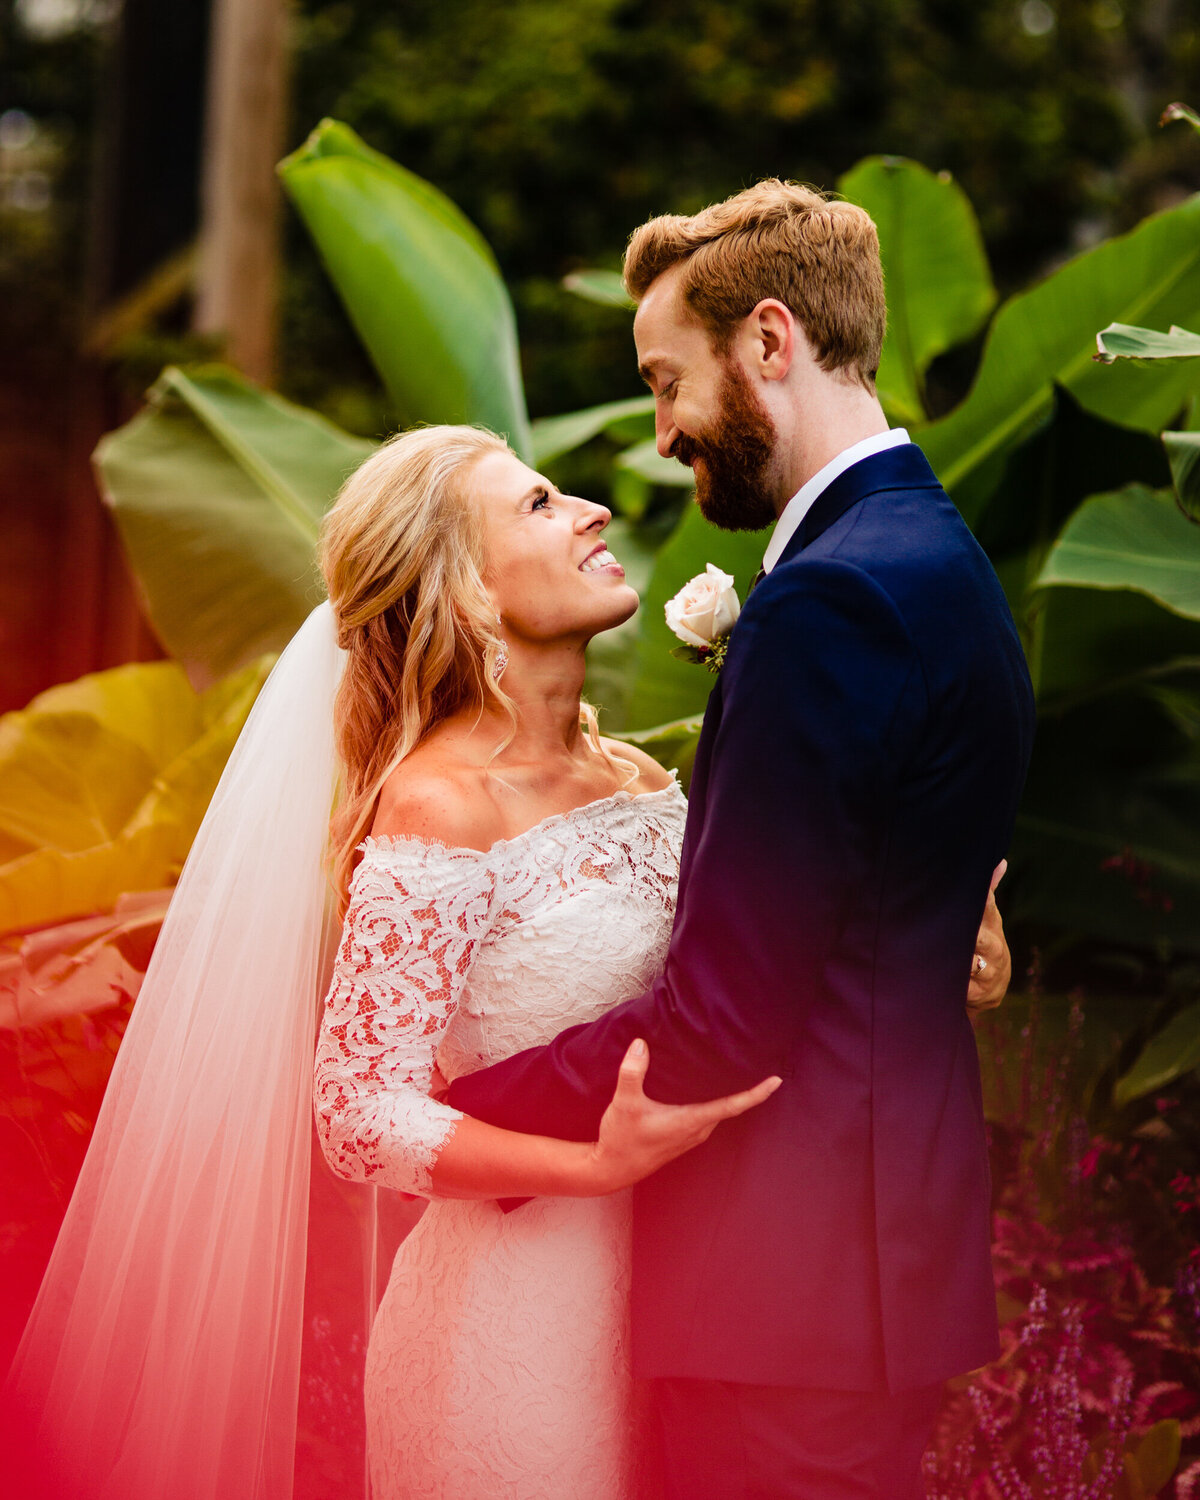 One of the top wedding photos of 2020. Taken by Adore Wedding Photography- Toledo, Ohio Wedding Photographers. This photo is of a bride and groom embracing at the Toledo Zoo during their wedding in front of a tropical plant